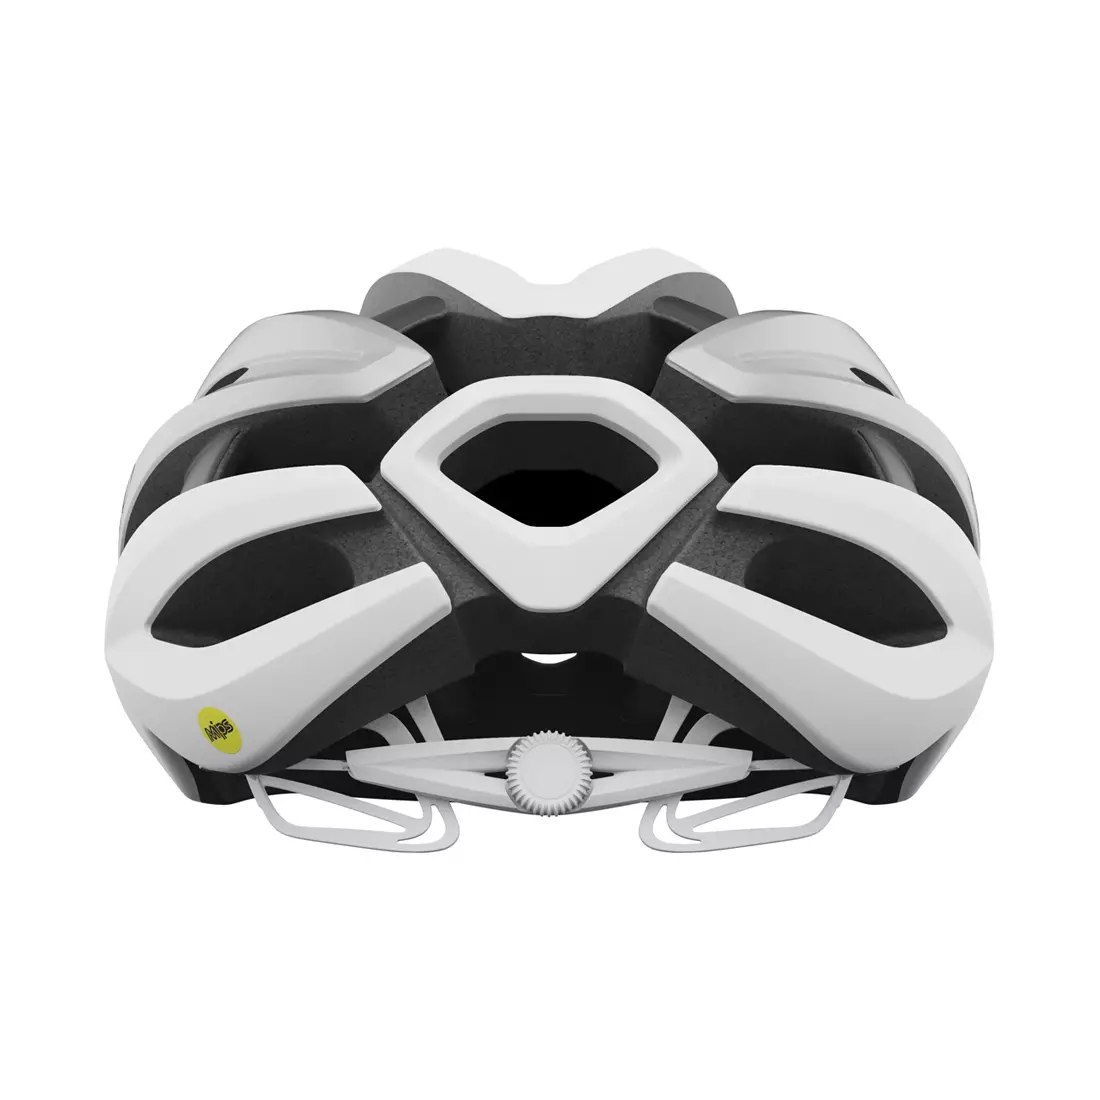 GIRO Fahrradhelm SYNTHE INTEGRATED MIPS II matte white silver GR-7130743